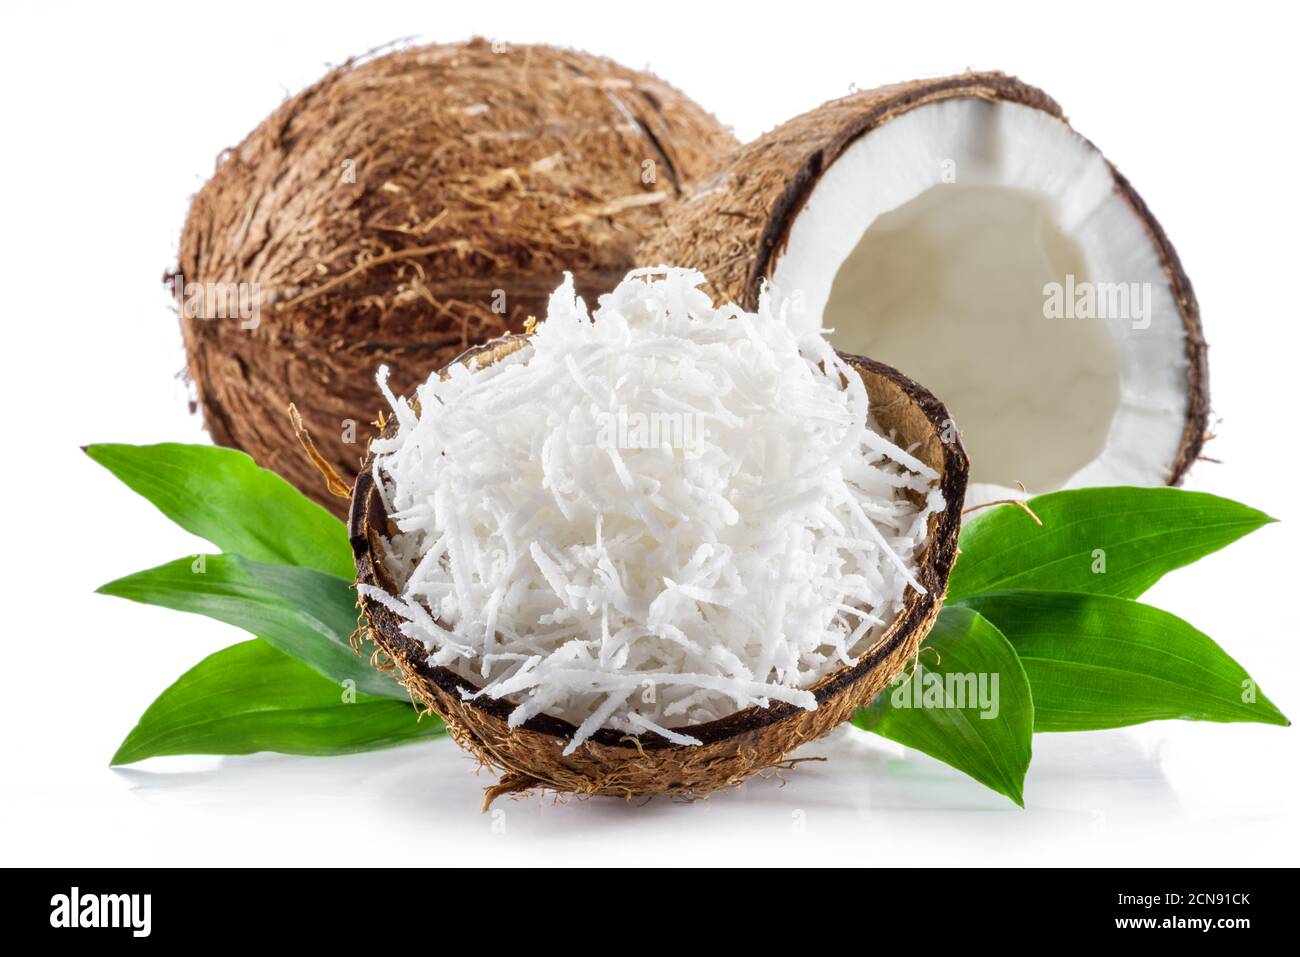 Coconut fruit and shredded coconut flakes in the piece of shell isolated on white background. Stock Photo